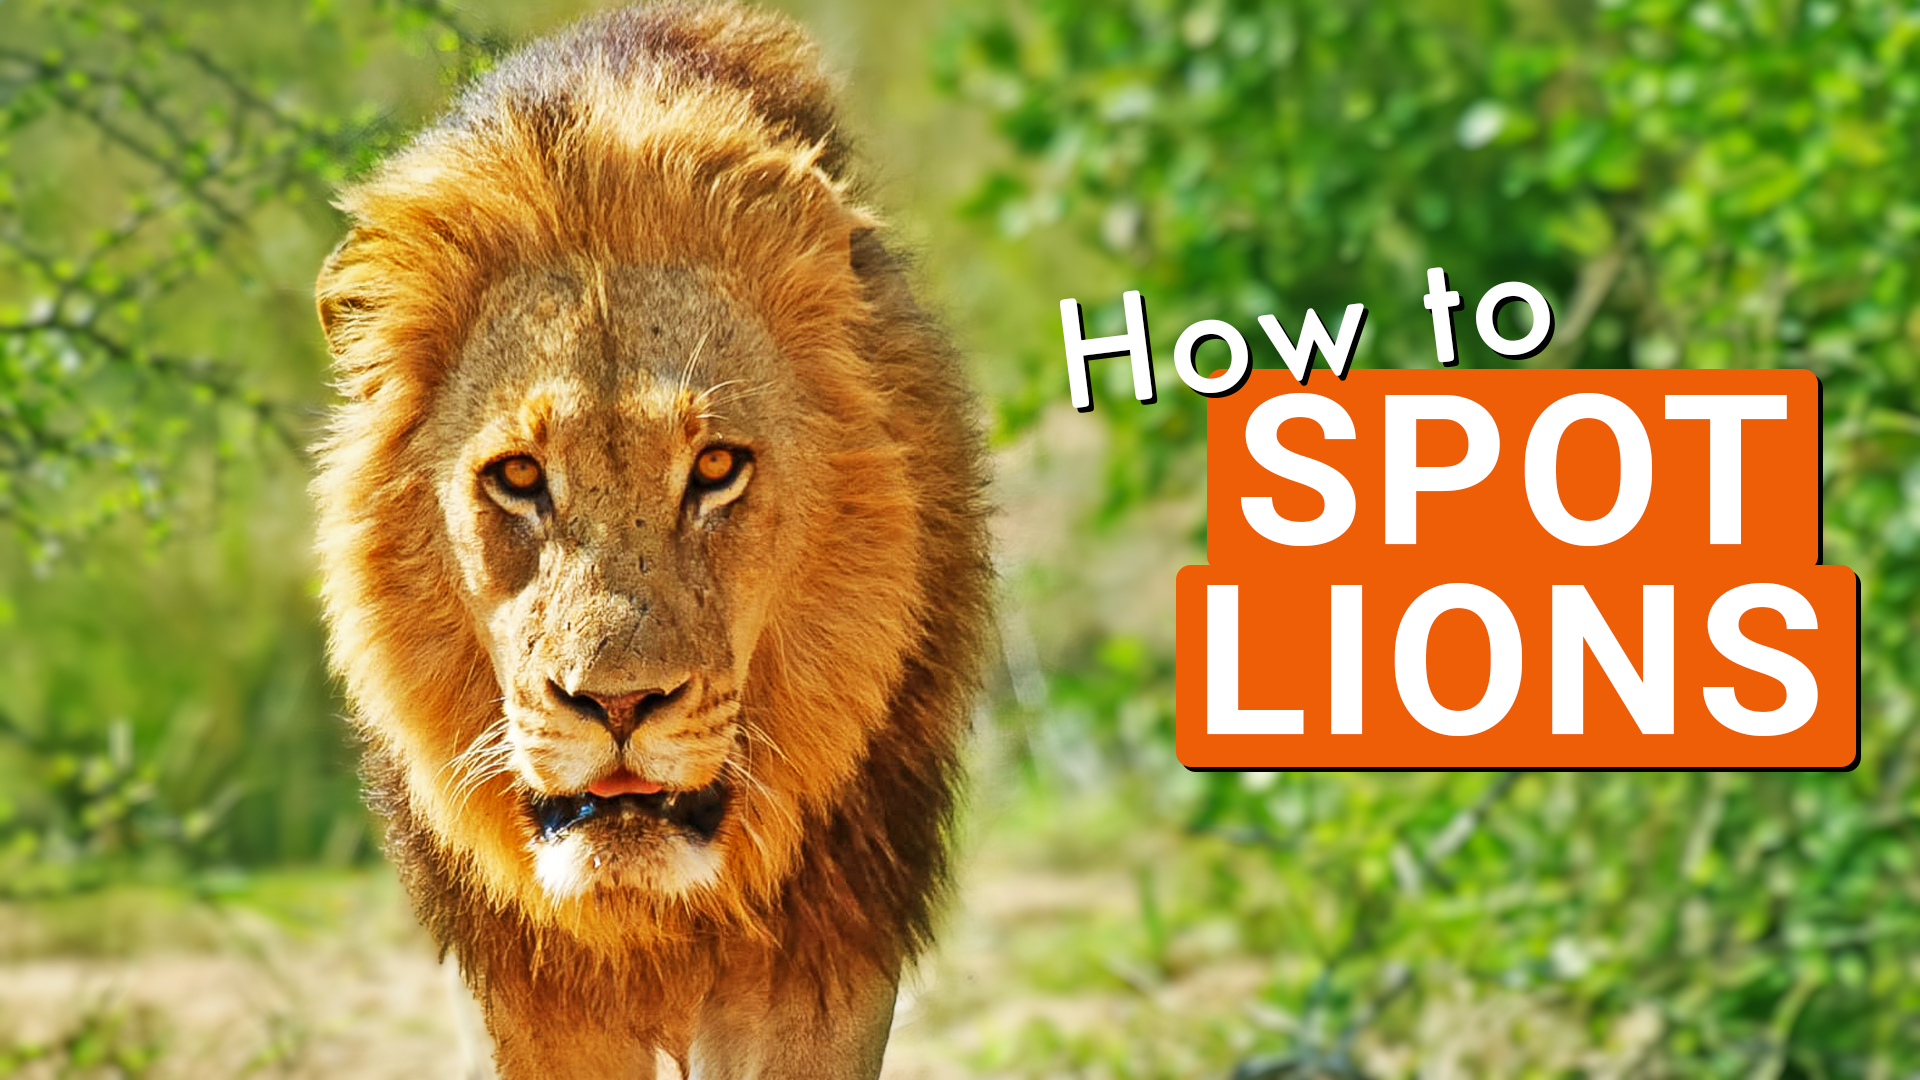 Top 5 Tips to Spot Lions in the Kruger National Park